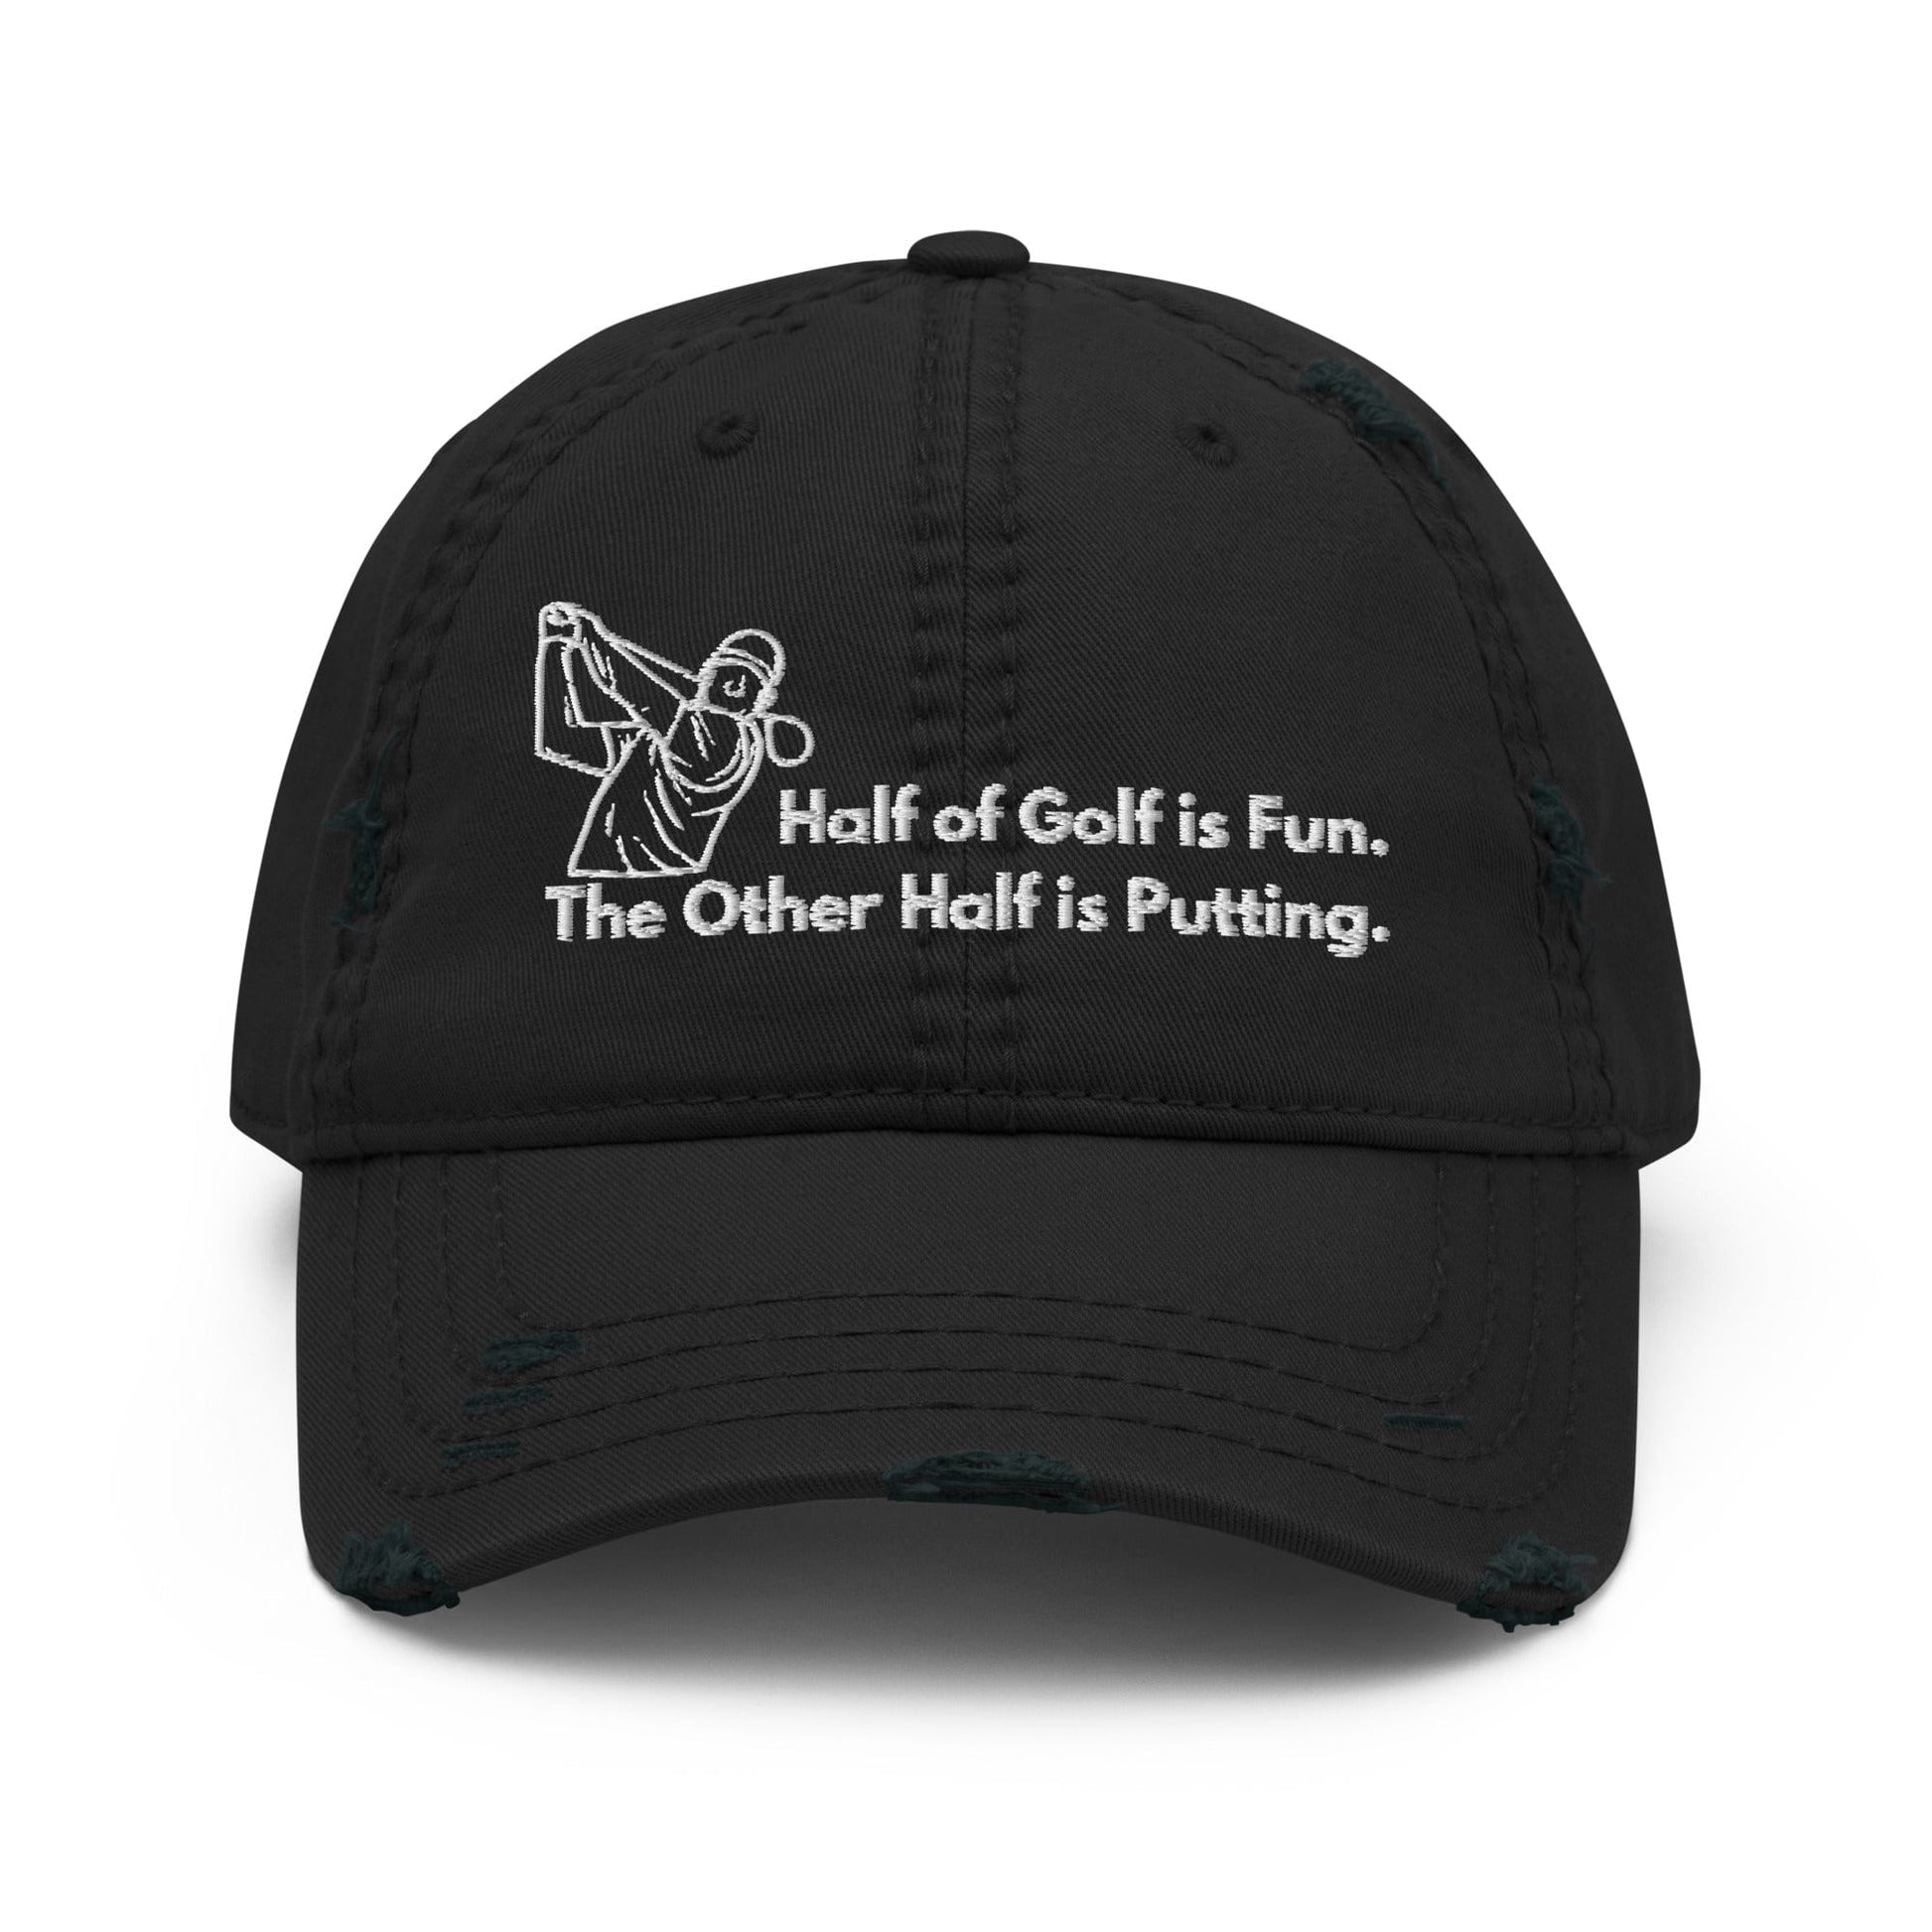 Funny Golfer Gifts  Distressed Cap Black Half of Golf is Fun Distressed Hat